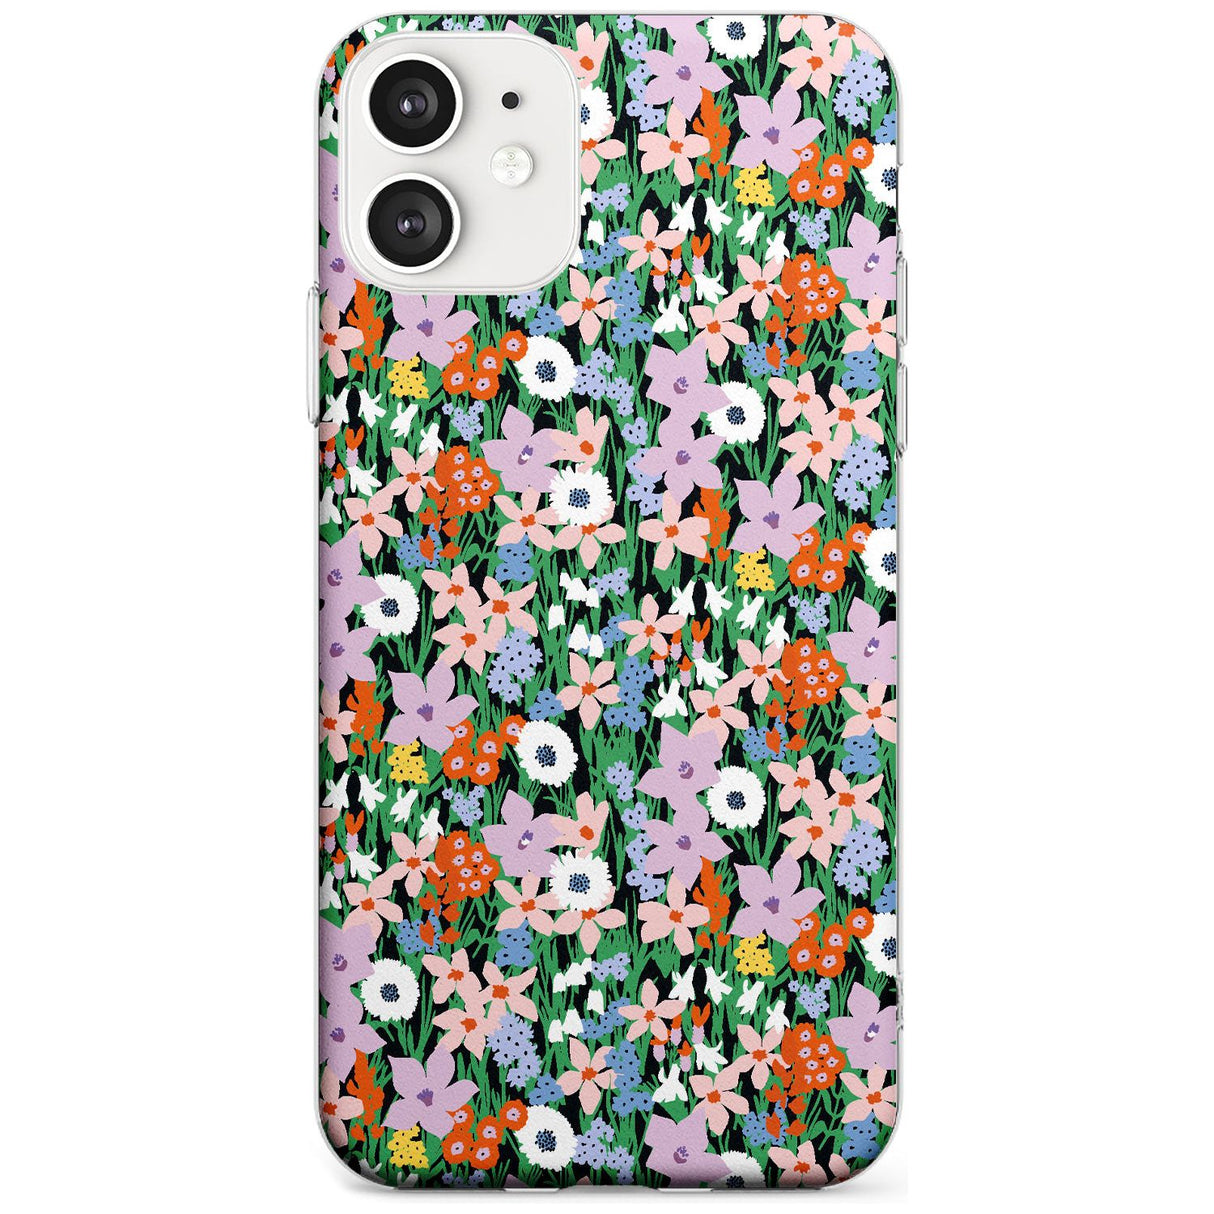 Jazzy Floral Mix: Solid Black Impact Phone Case for iPhone 11